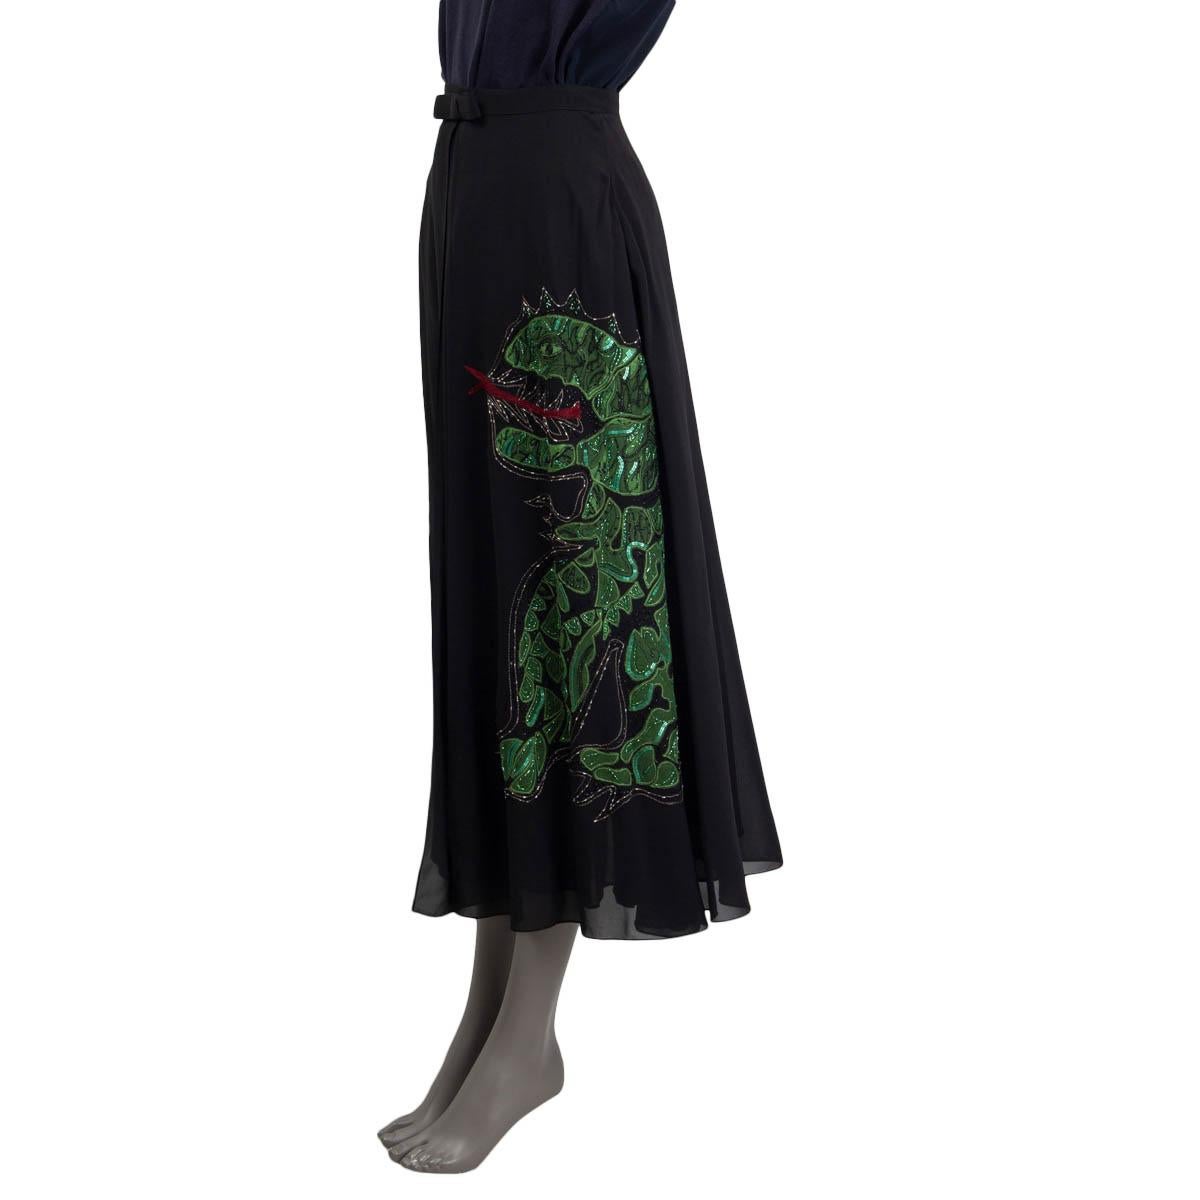 100% authentic Christian Dior 2018 midi wrap skirt in black silk (100%). Features a green dragon embroidered on the front a mesh at the front. Opens with a hook and a push button on the front. Comes with a slip skirt in black silk (100%). Has been